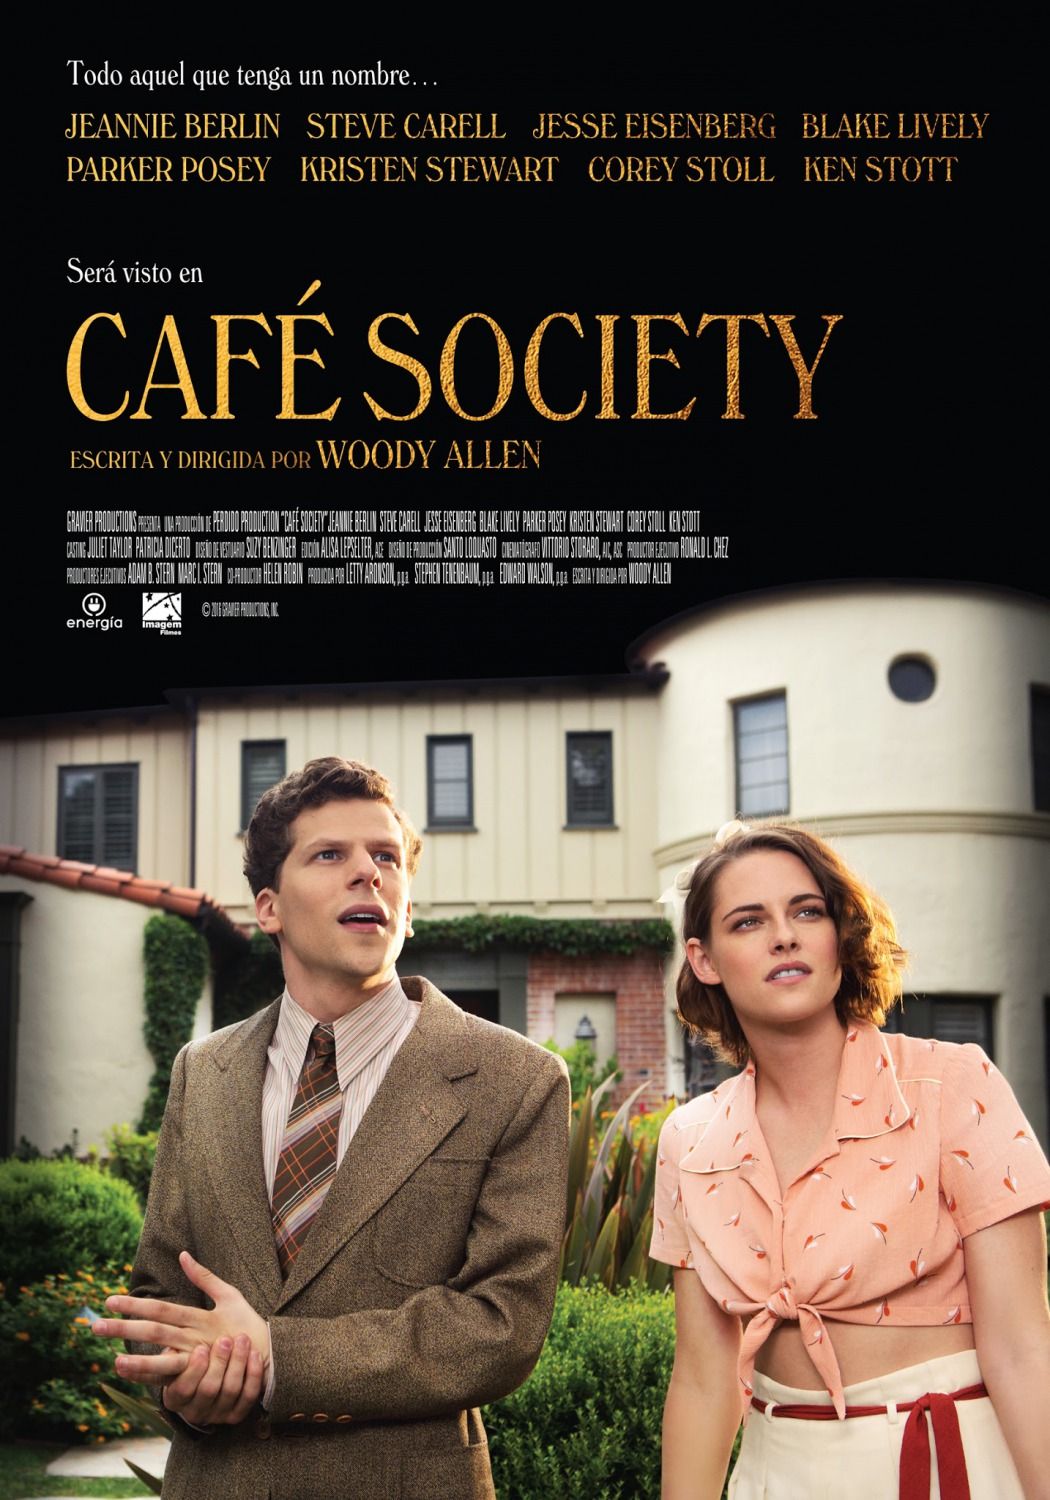 1050x1500 Cafe Society Wallpaper Movie Hq Cafe Society Picture 4k Wallpaper 2019